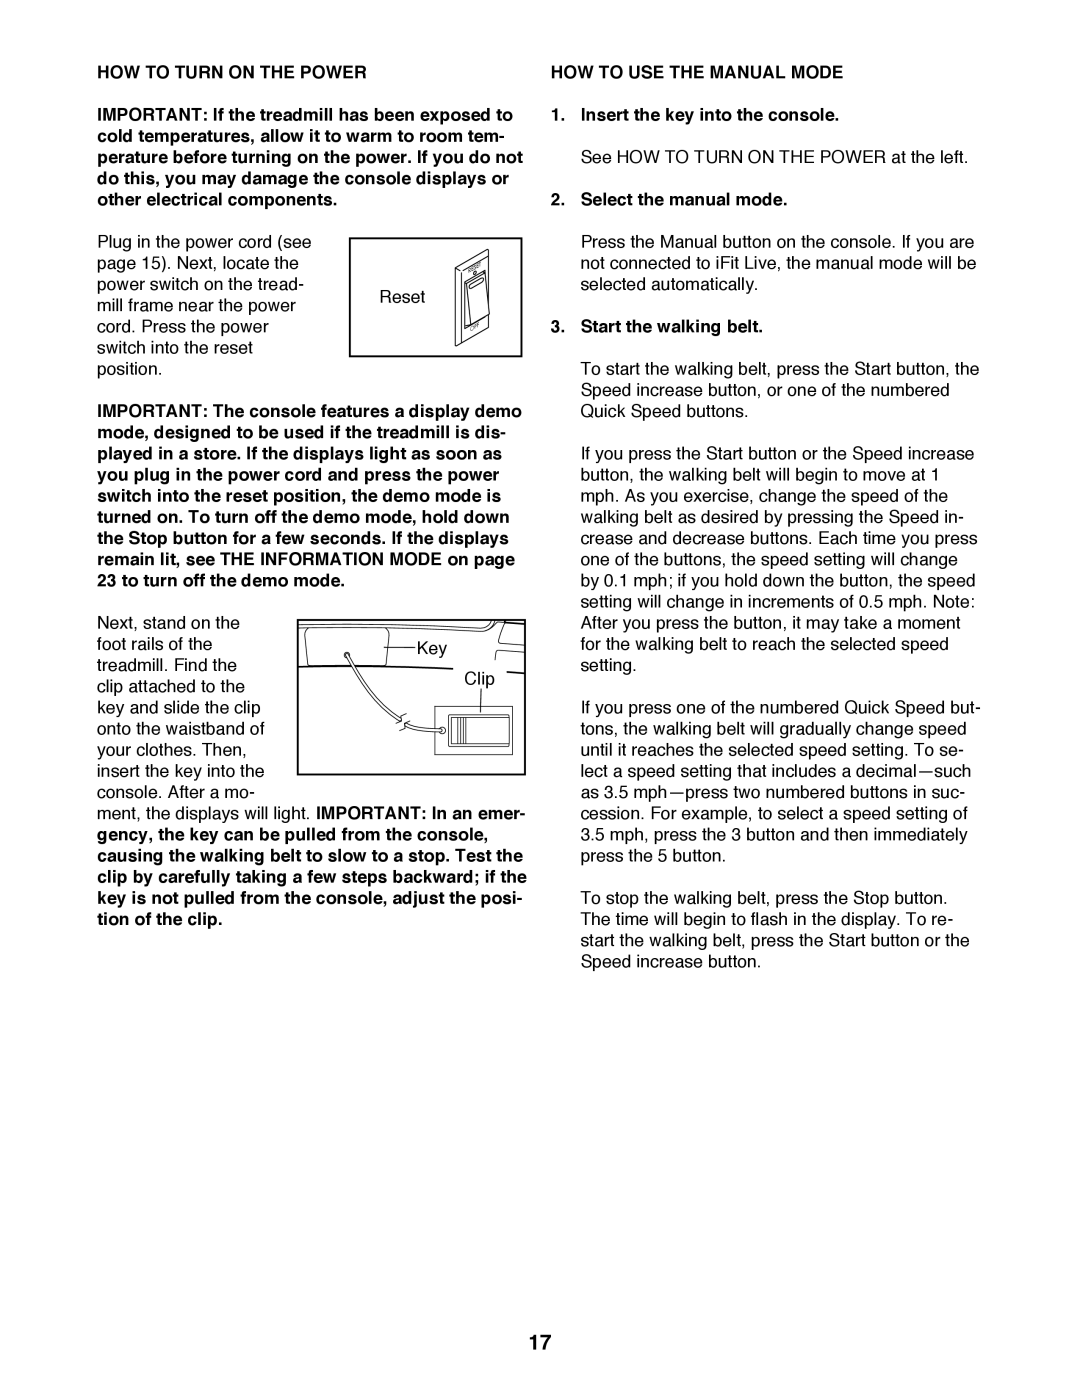 ProForm 795 user manual How To Turn On The Power, HOW TO USE THE MANUAL MODE 1. Insert the key into the console 